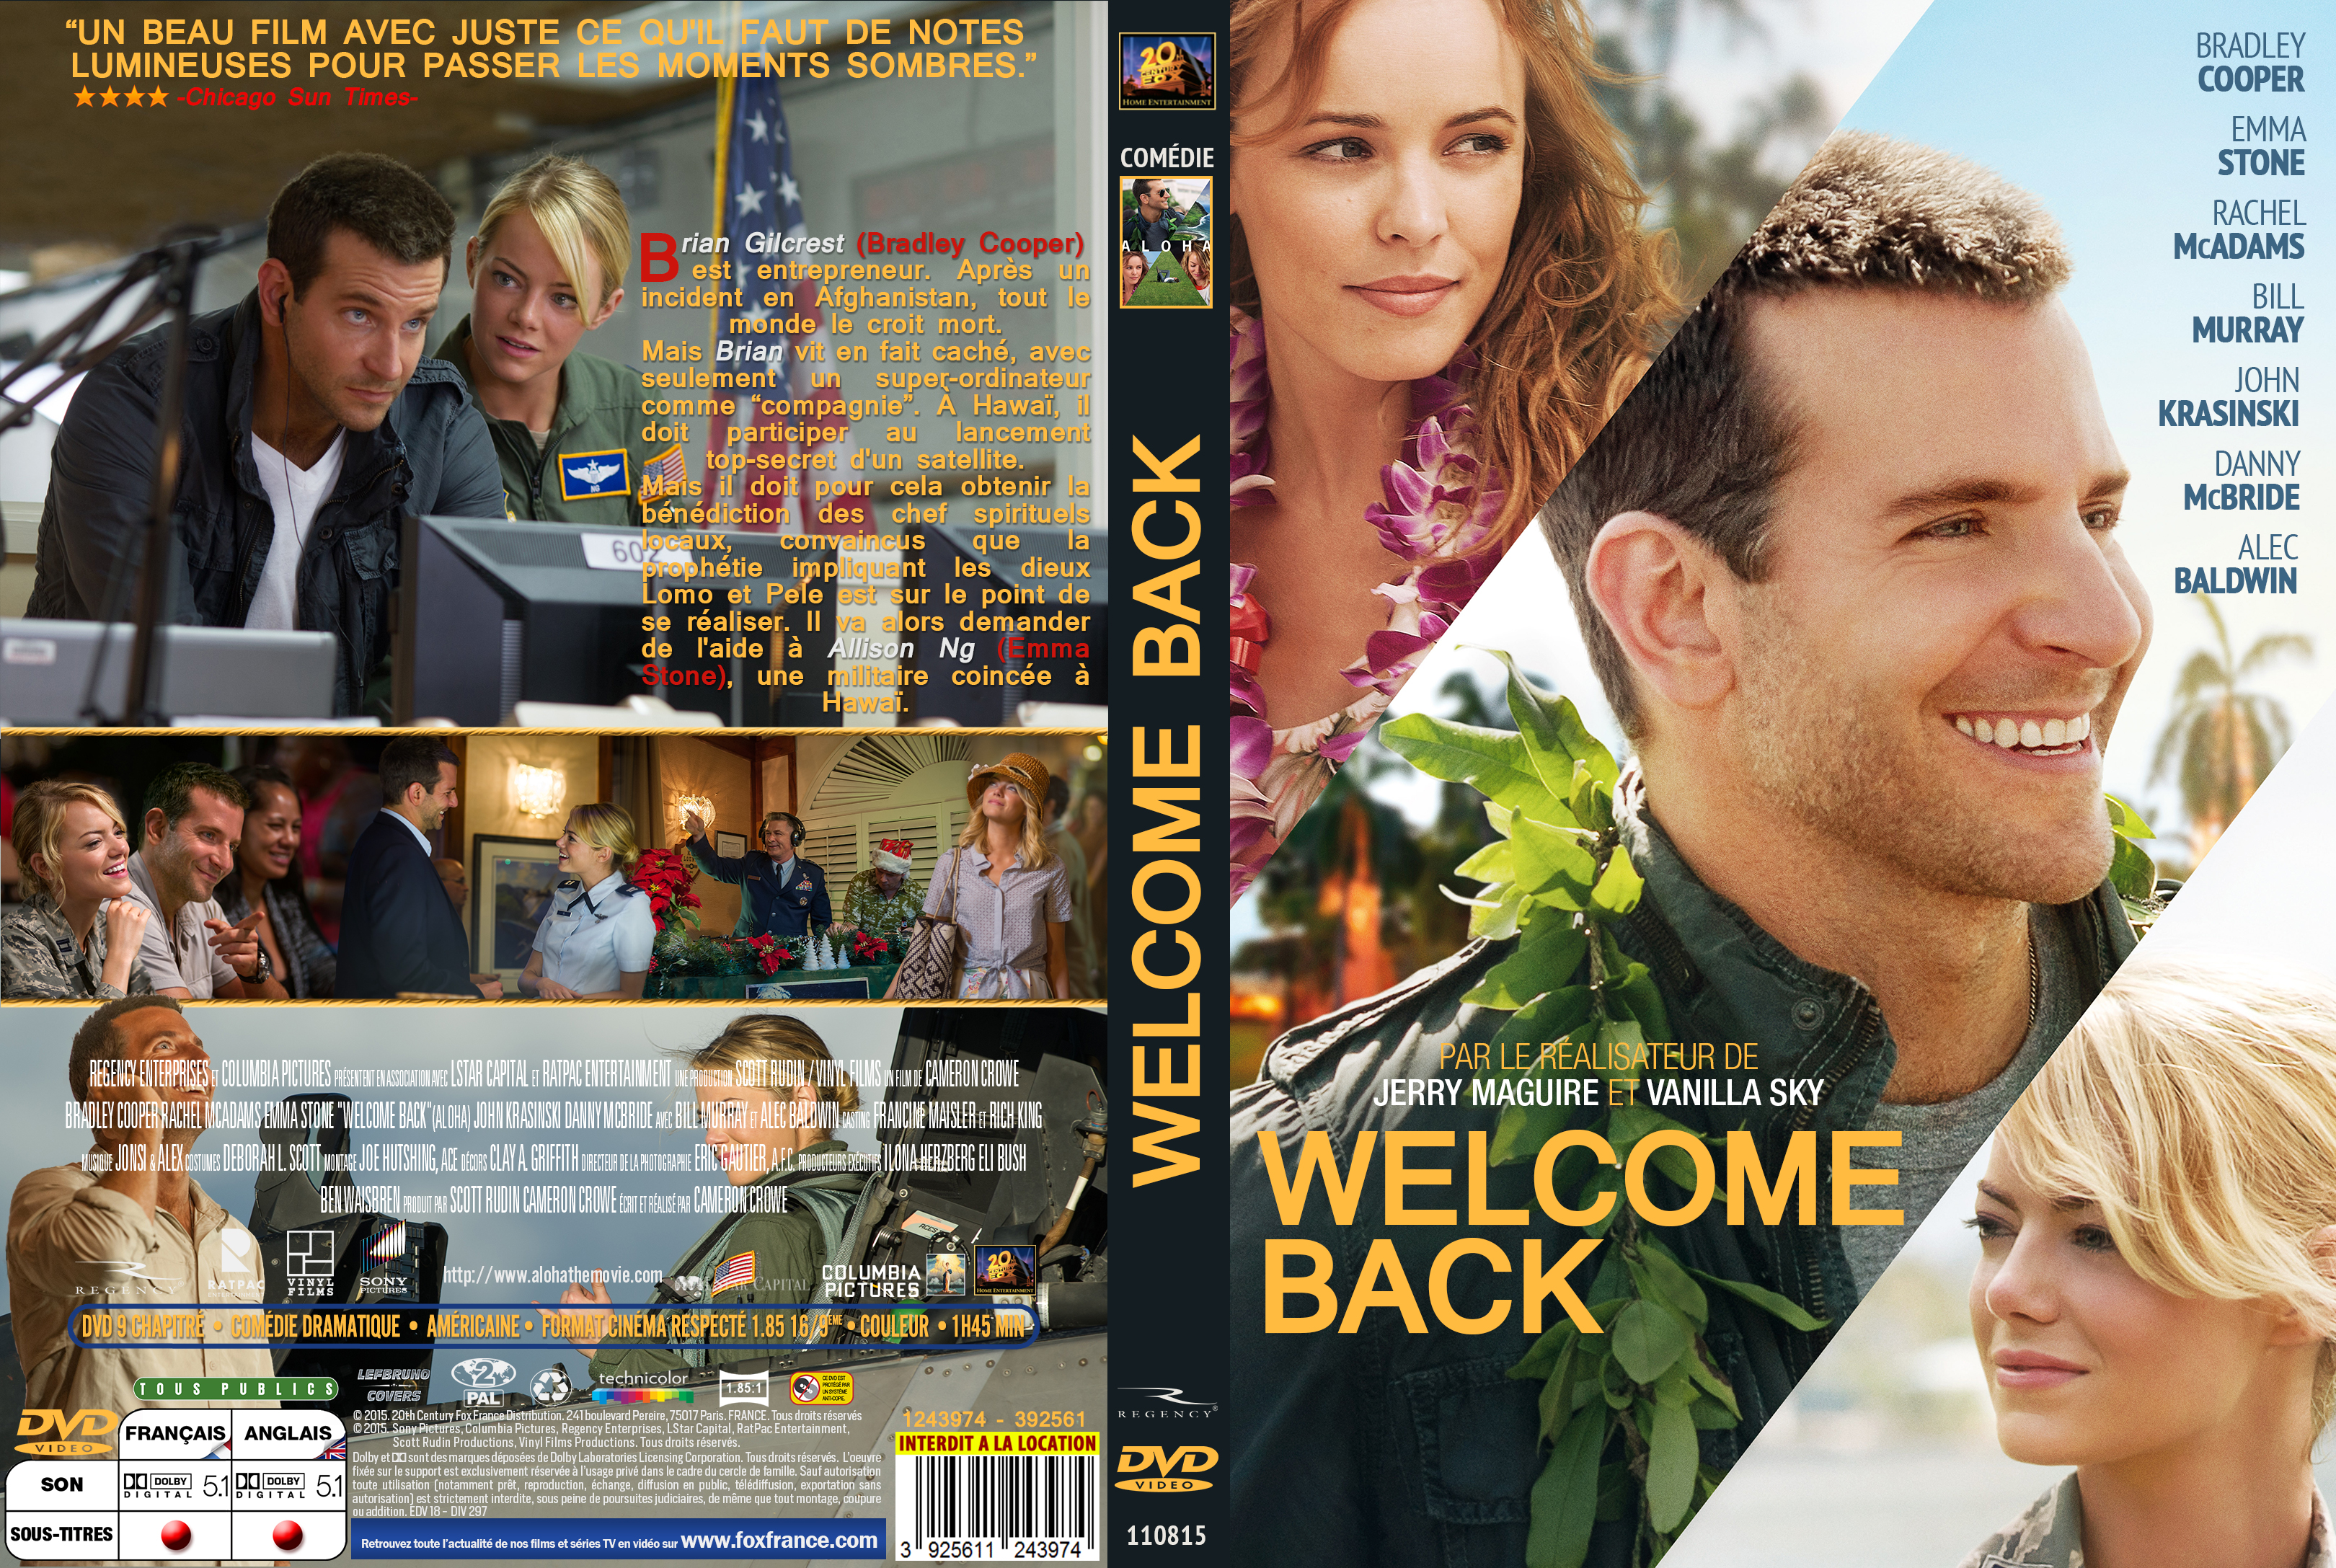 Jaquette DVD Welcome Back custom